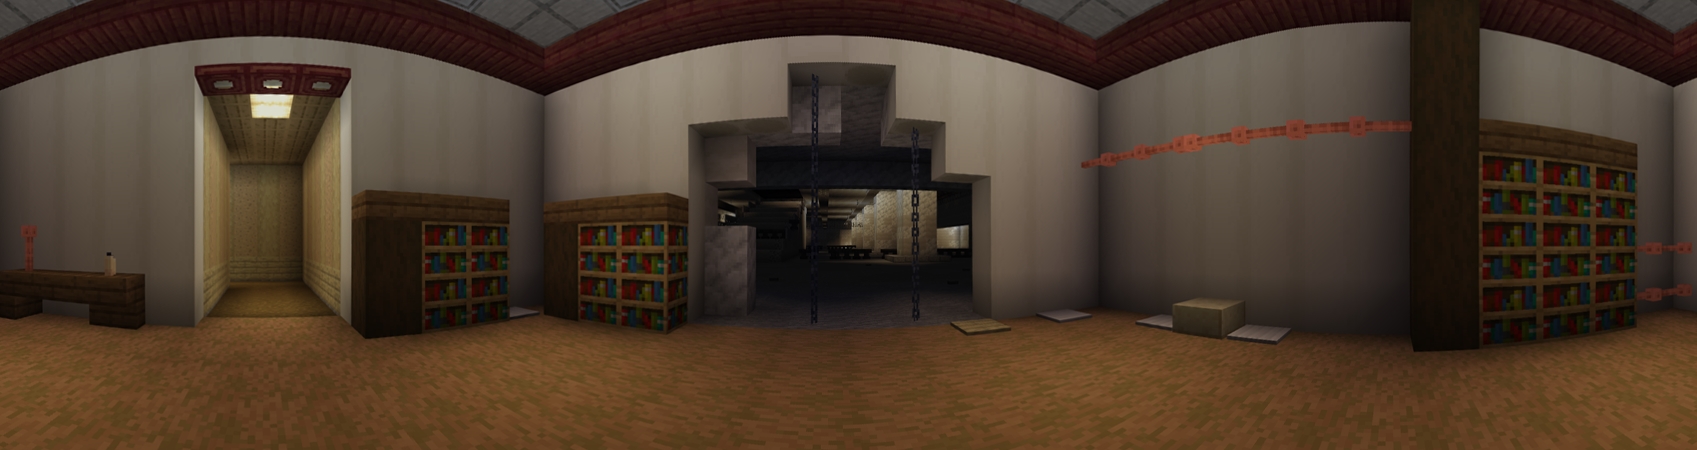 The Backrooms - Minecraft Map Review (Marketplace)  You have no clipped  out of reality and you find yourself in The Backrooms! Explore the eerie  liminal spaces of The Backrooms. Escape the